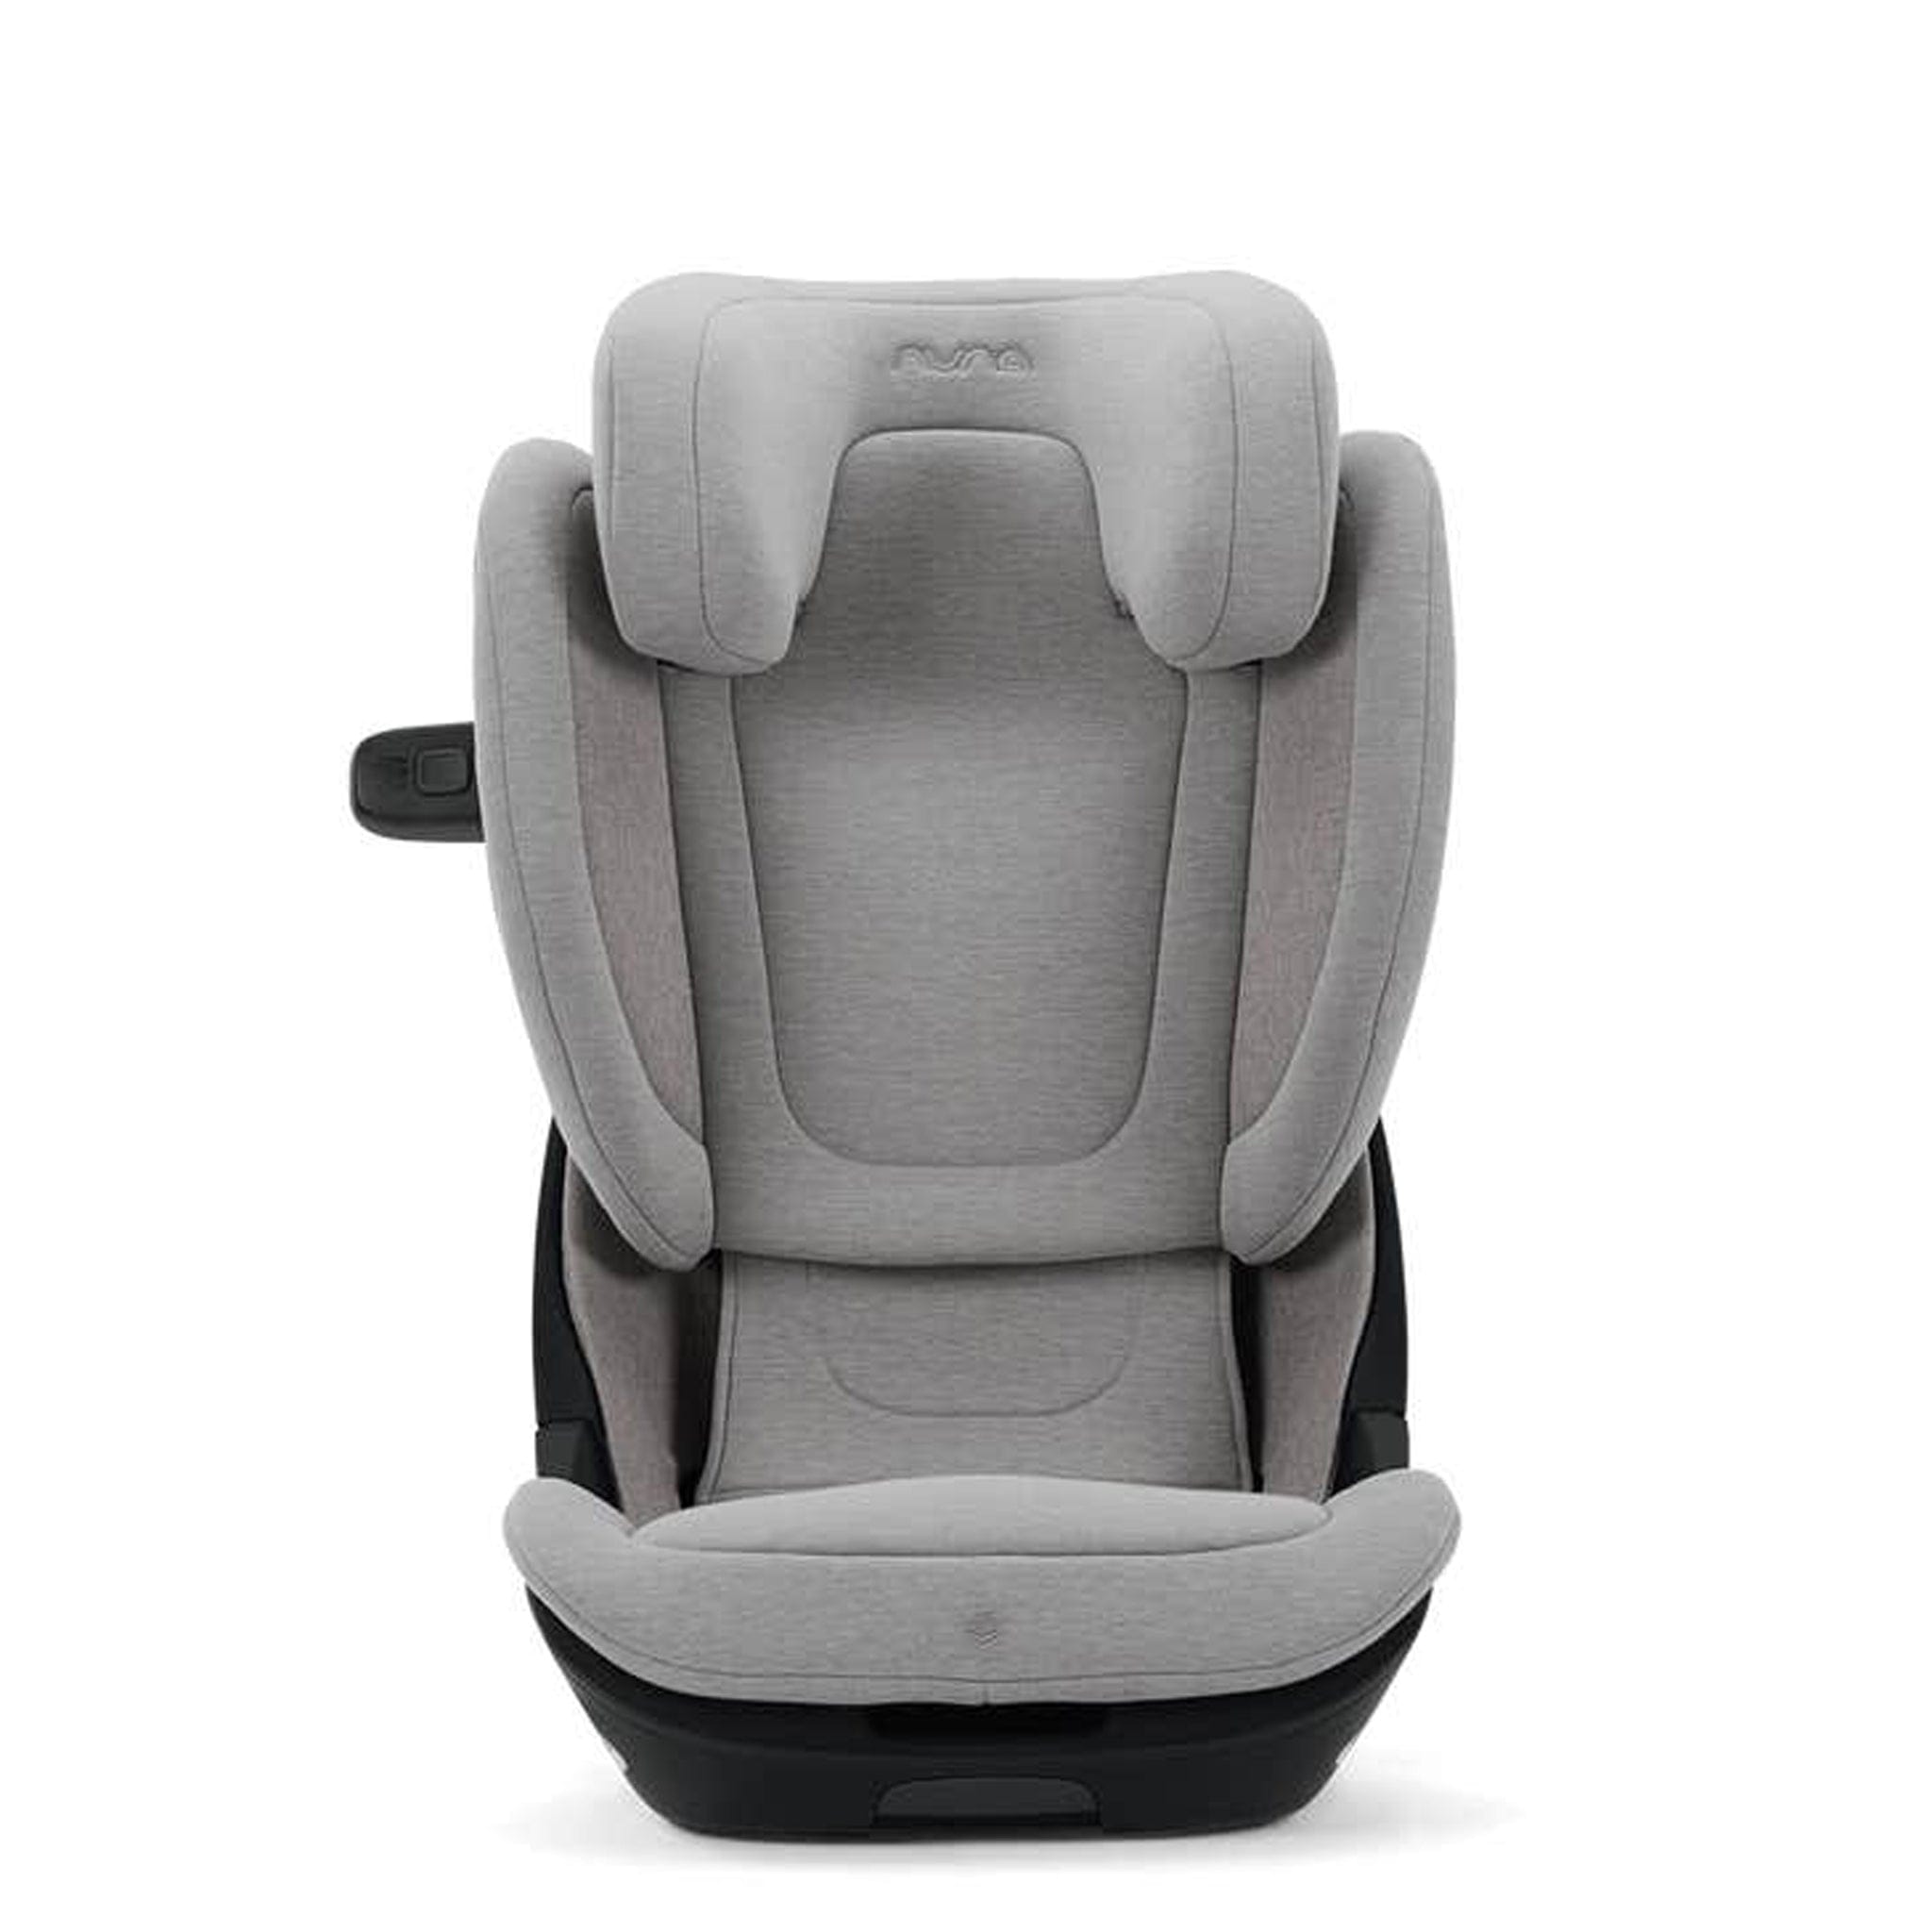 Nuna Highback Booster Seats Nuna AACE lx i-Size High back Booster Seat in Frost